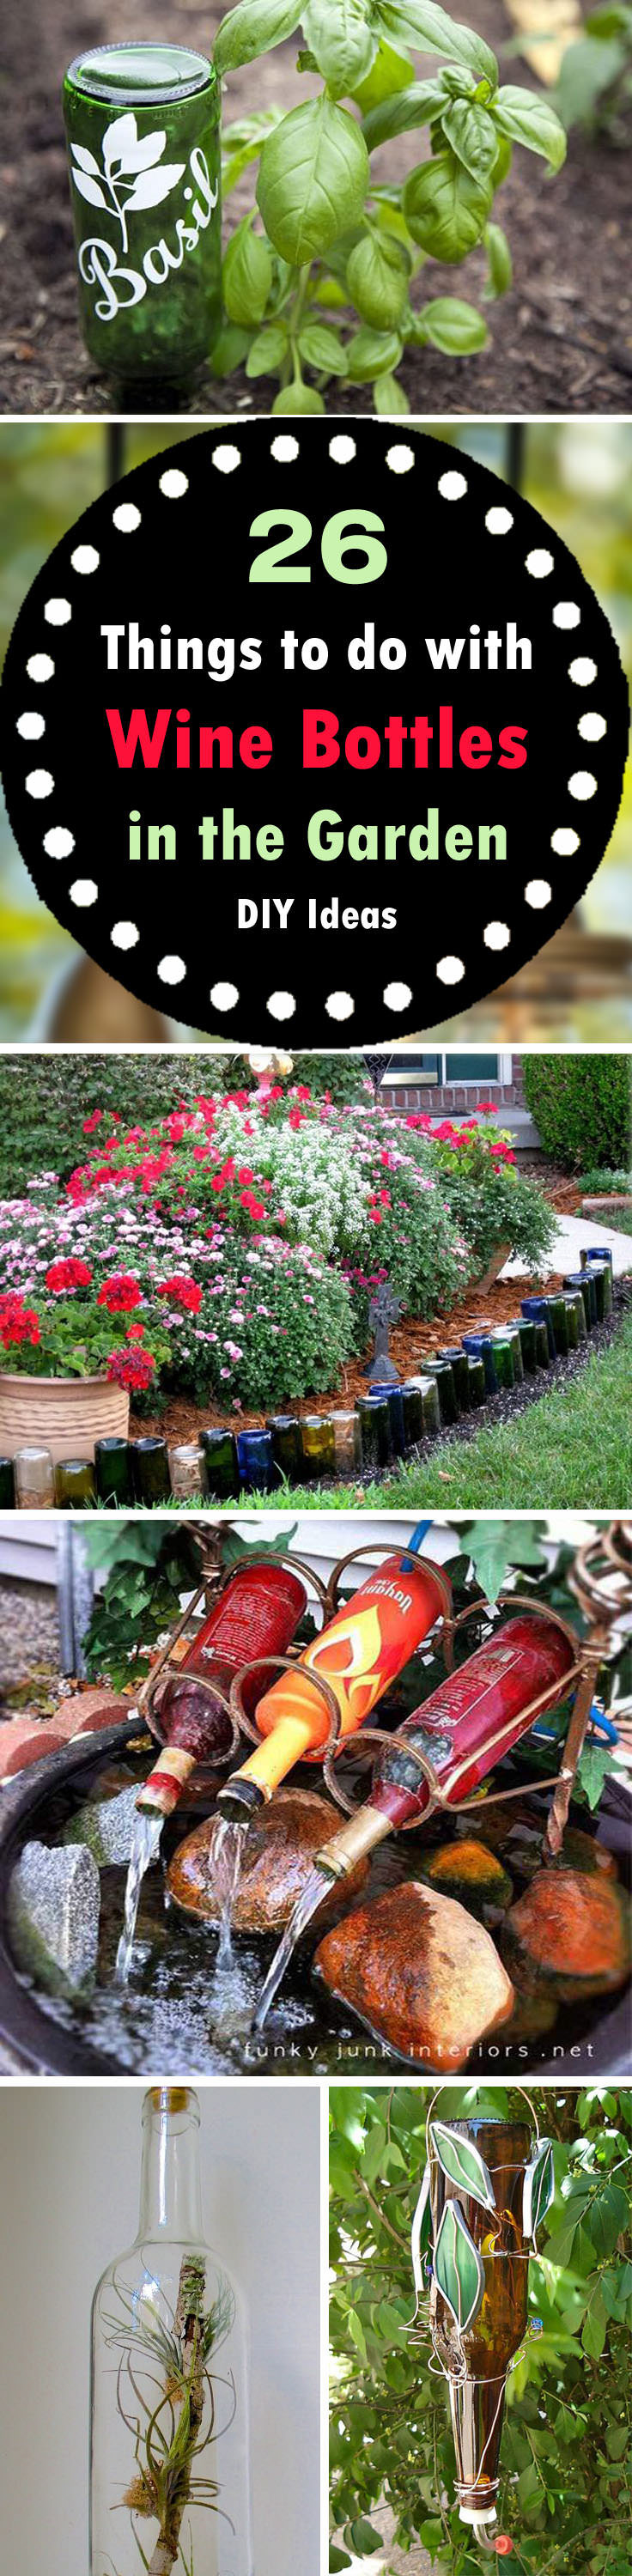 15 Ideal Wine Bottle Wall Vase 2024 free download wine bottle wall vase of diy wine bottle ideas for the garden 26 wine bottle uses balcony with if you have got empty wine bottles in your home then these 26 diy wine bottle